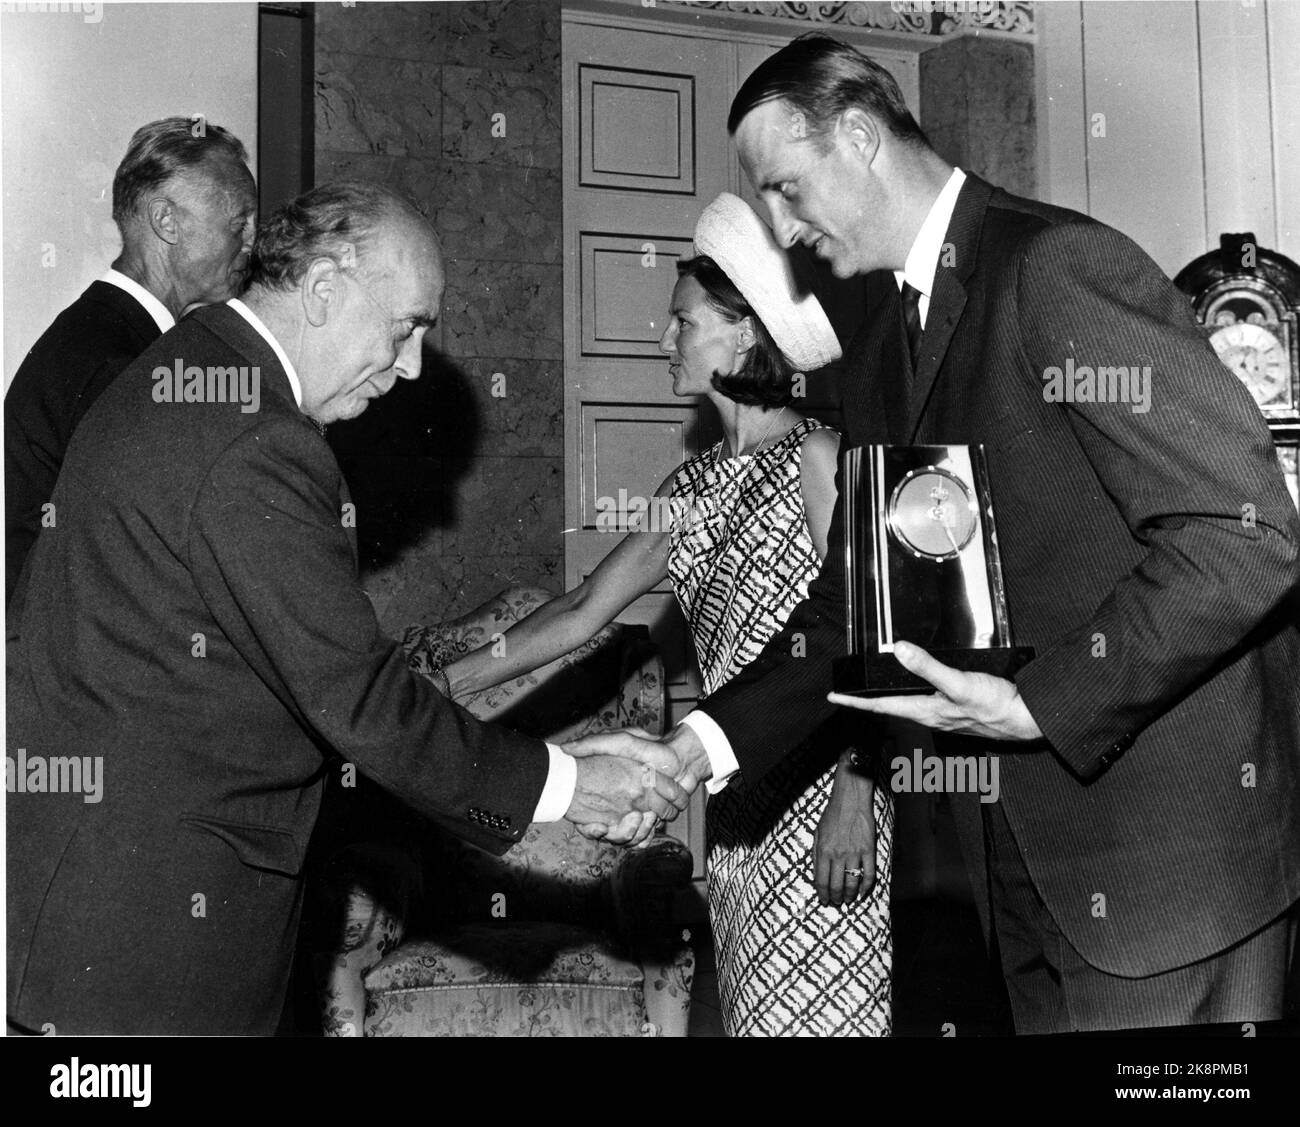 Oslo 1968-08-29: Royal Norwegian wedding. Crown Prince Harald marries Sonja Haraldsen. The couple received a lot of gifts. Here they receive the gift from Oslo city by Mayor Brynjulf Bull, a clock. Sonja in hat and short dress, Harald in suit. Ntb archive / ntb Stock Photo